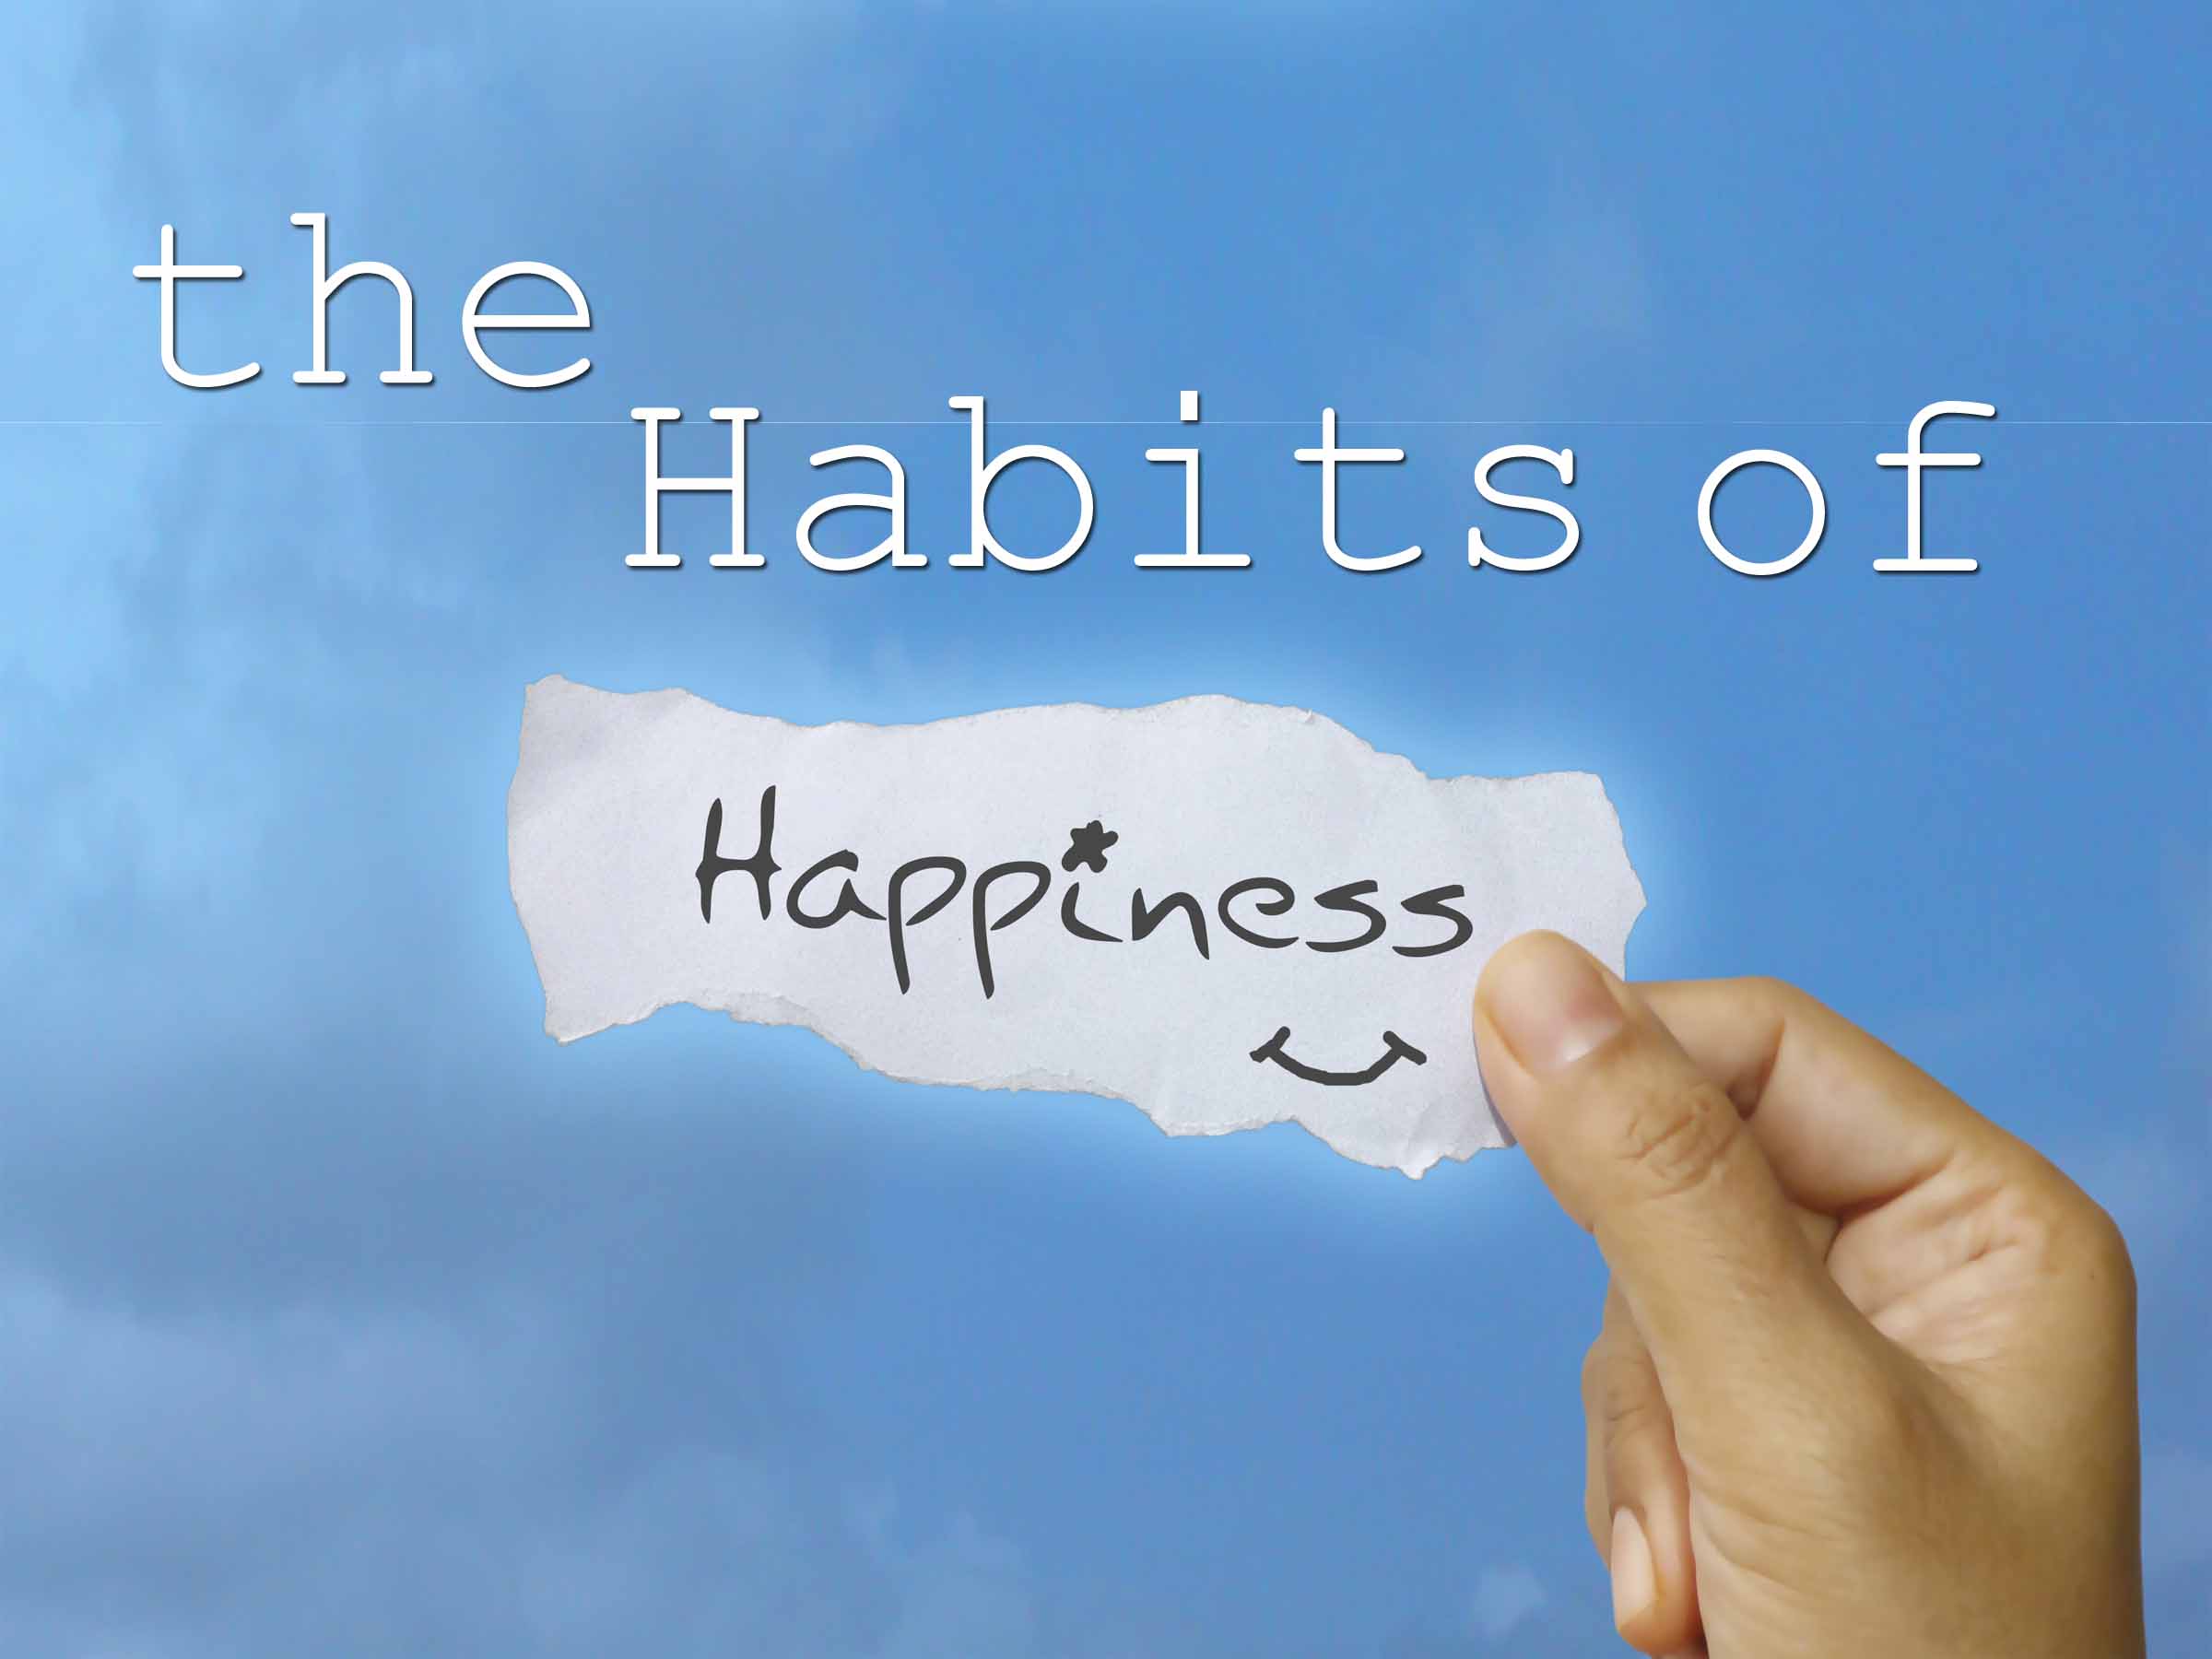 12-28-14 The Habits of Happiness - Part 1